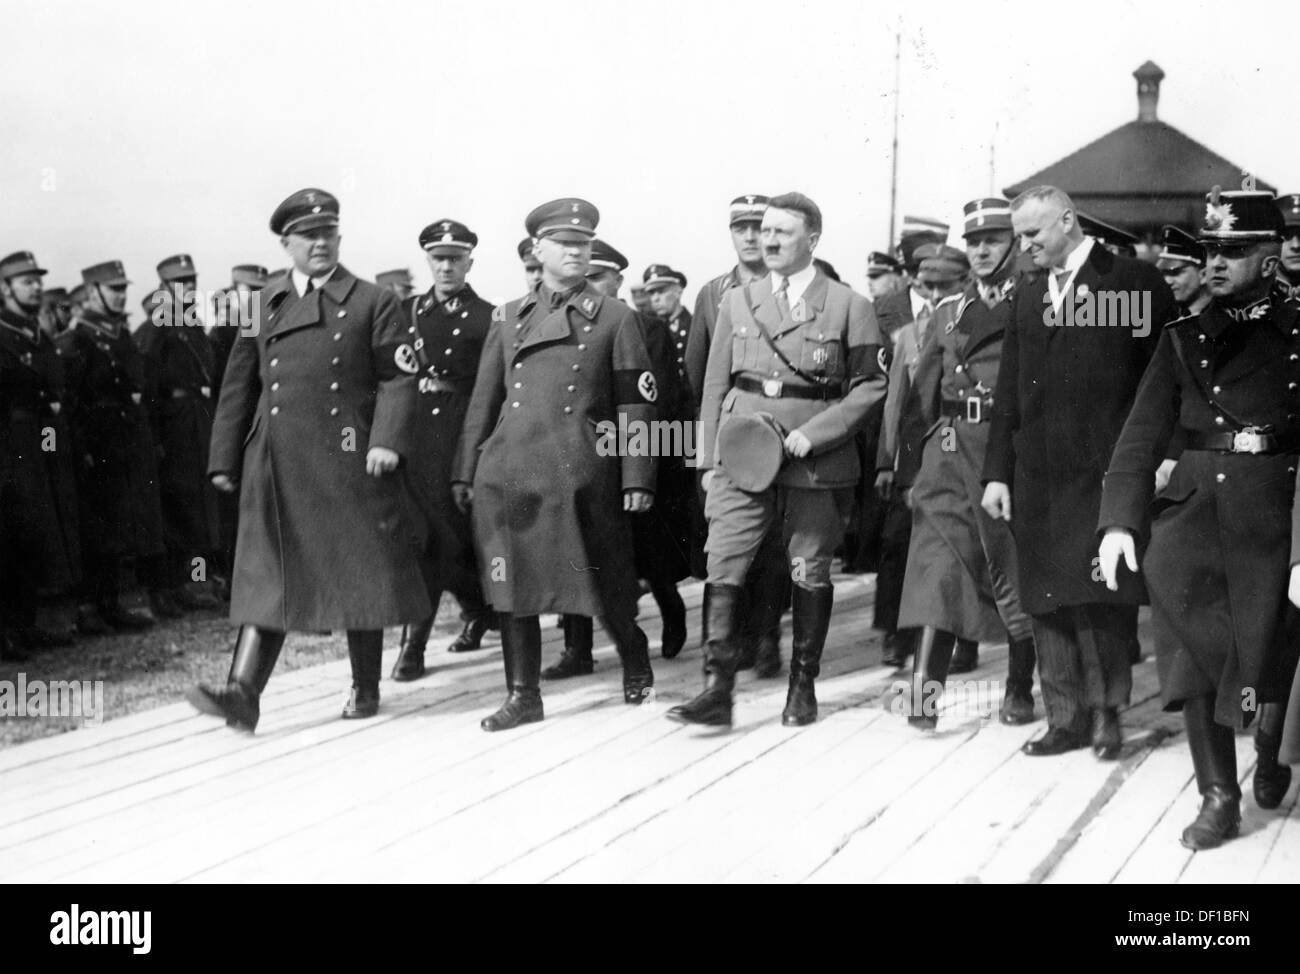 The image from the Nazi Propaganda! shows Adolf Hitler on the occasion of the cornerstone laying ceremony for the Richard Wagner Memorial in Leipzig, Germany, 6 March 1934. Fotoarchiv für Zeitgeschichte Stock Photo